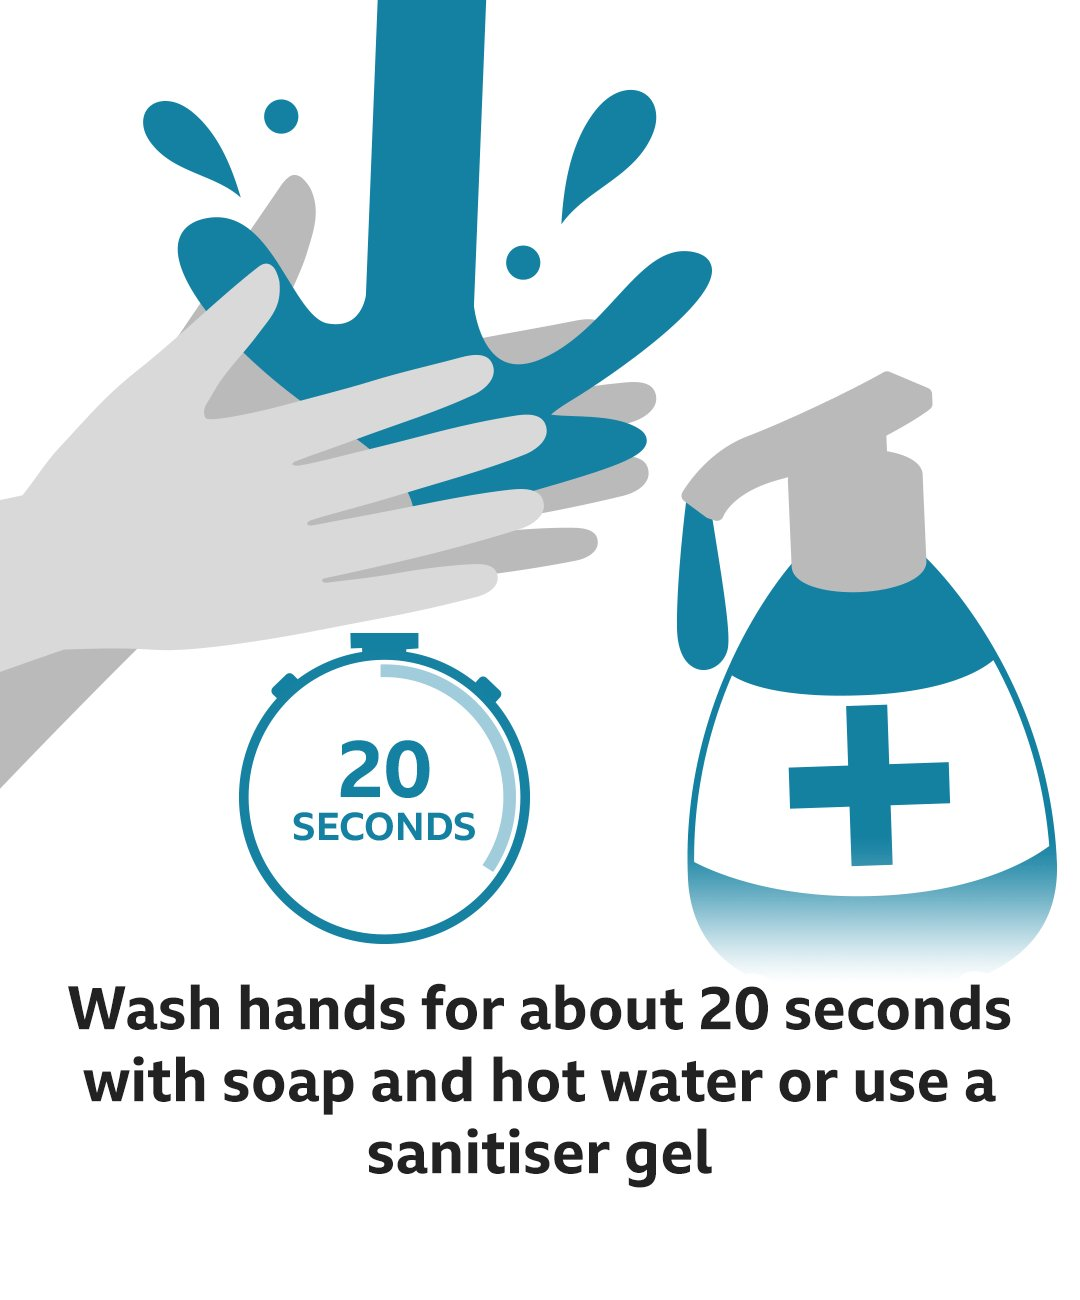 Text reads: Wash hands for about 20 seconds with soap and hot water or use a sanitiser gel